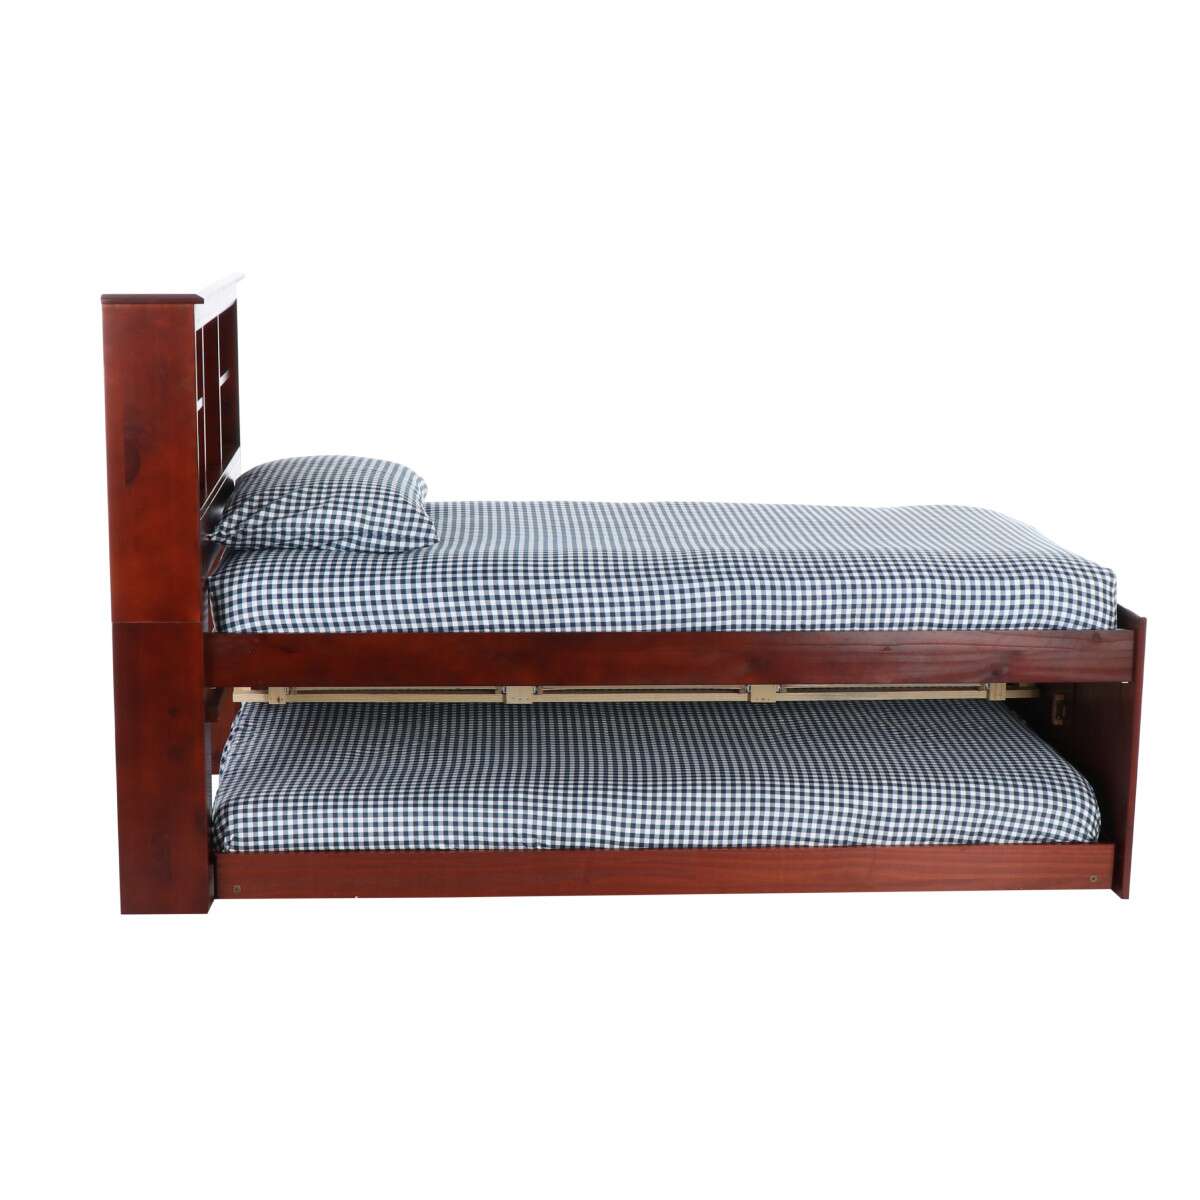 TWIN BOOKCASE BED WITH 3 DRAWER STORAGE AND TWIN TRUNDLE BED IN MERLOT FINISH